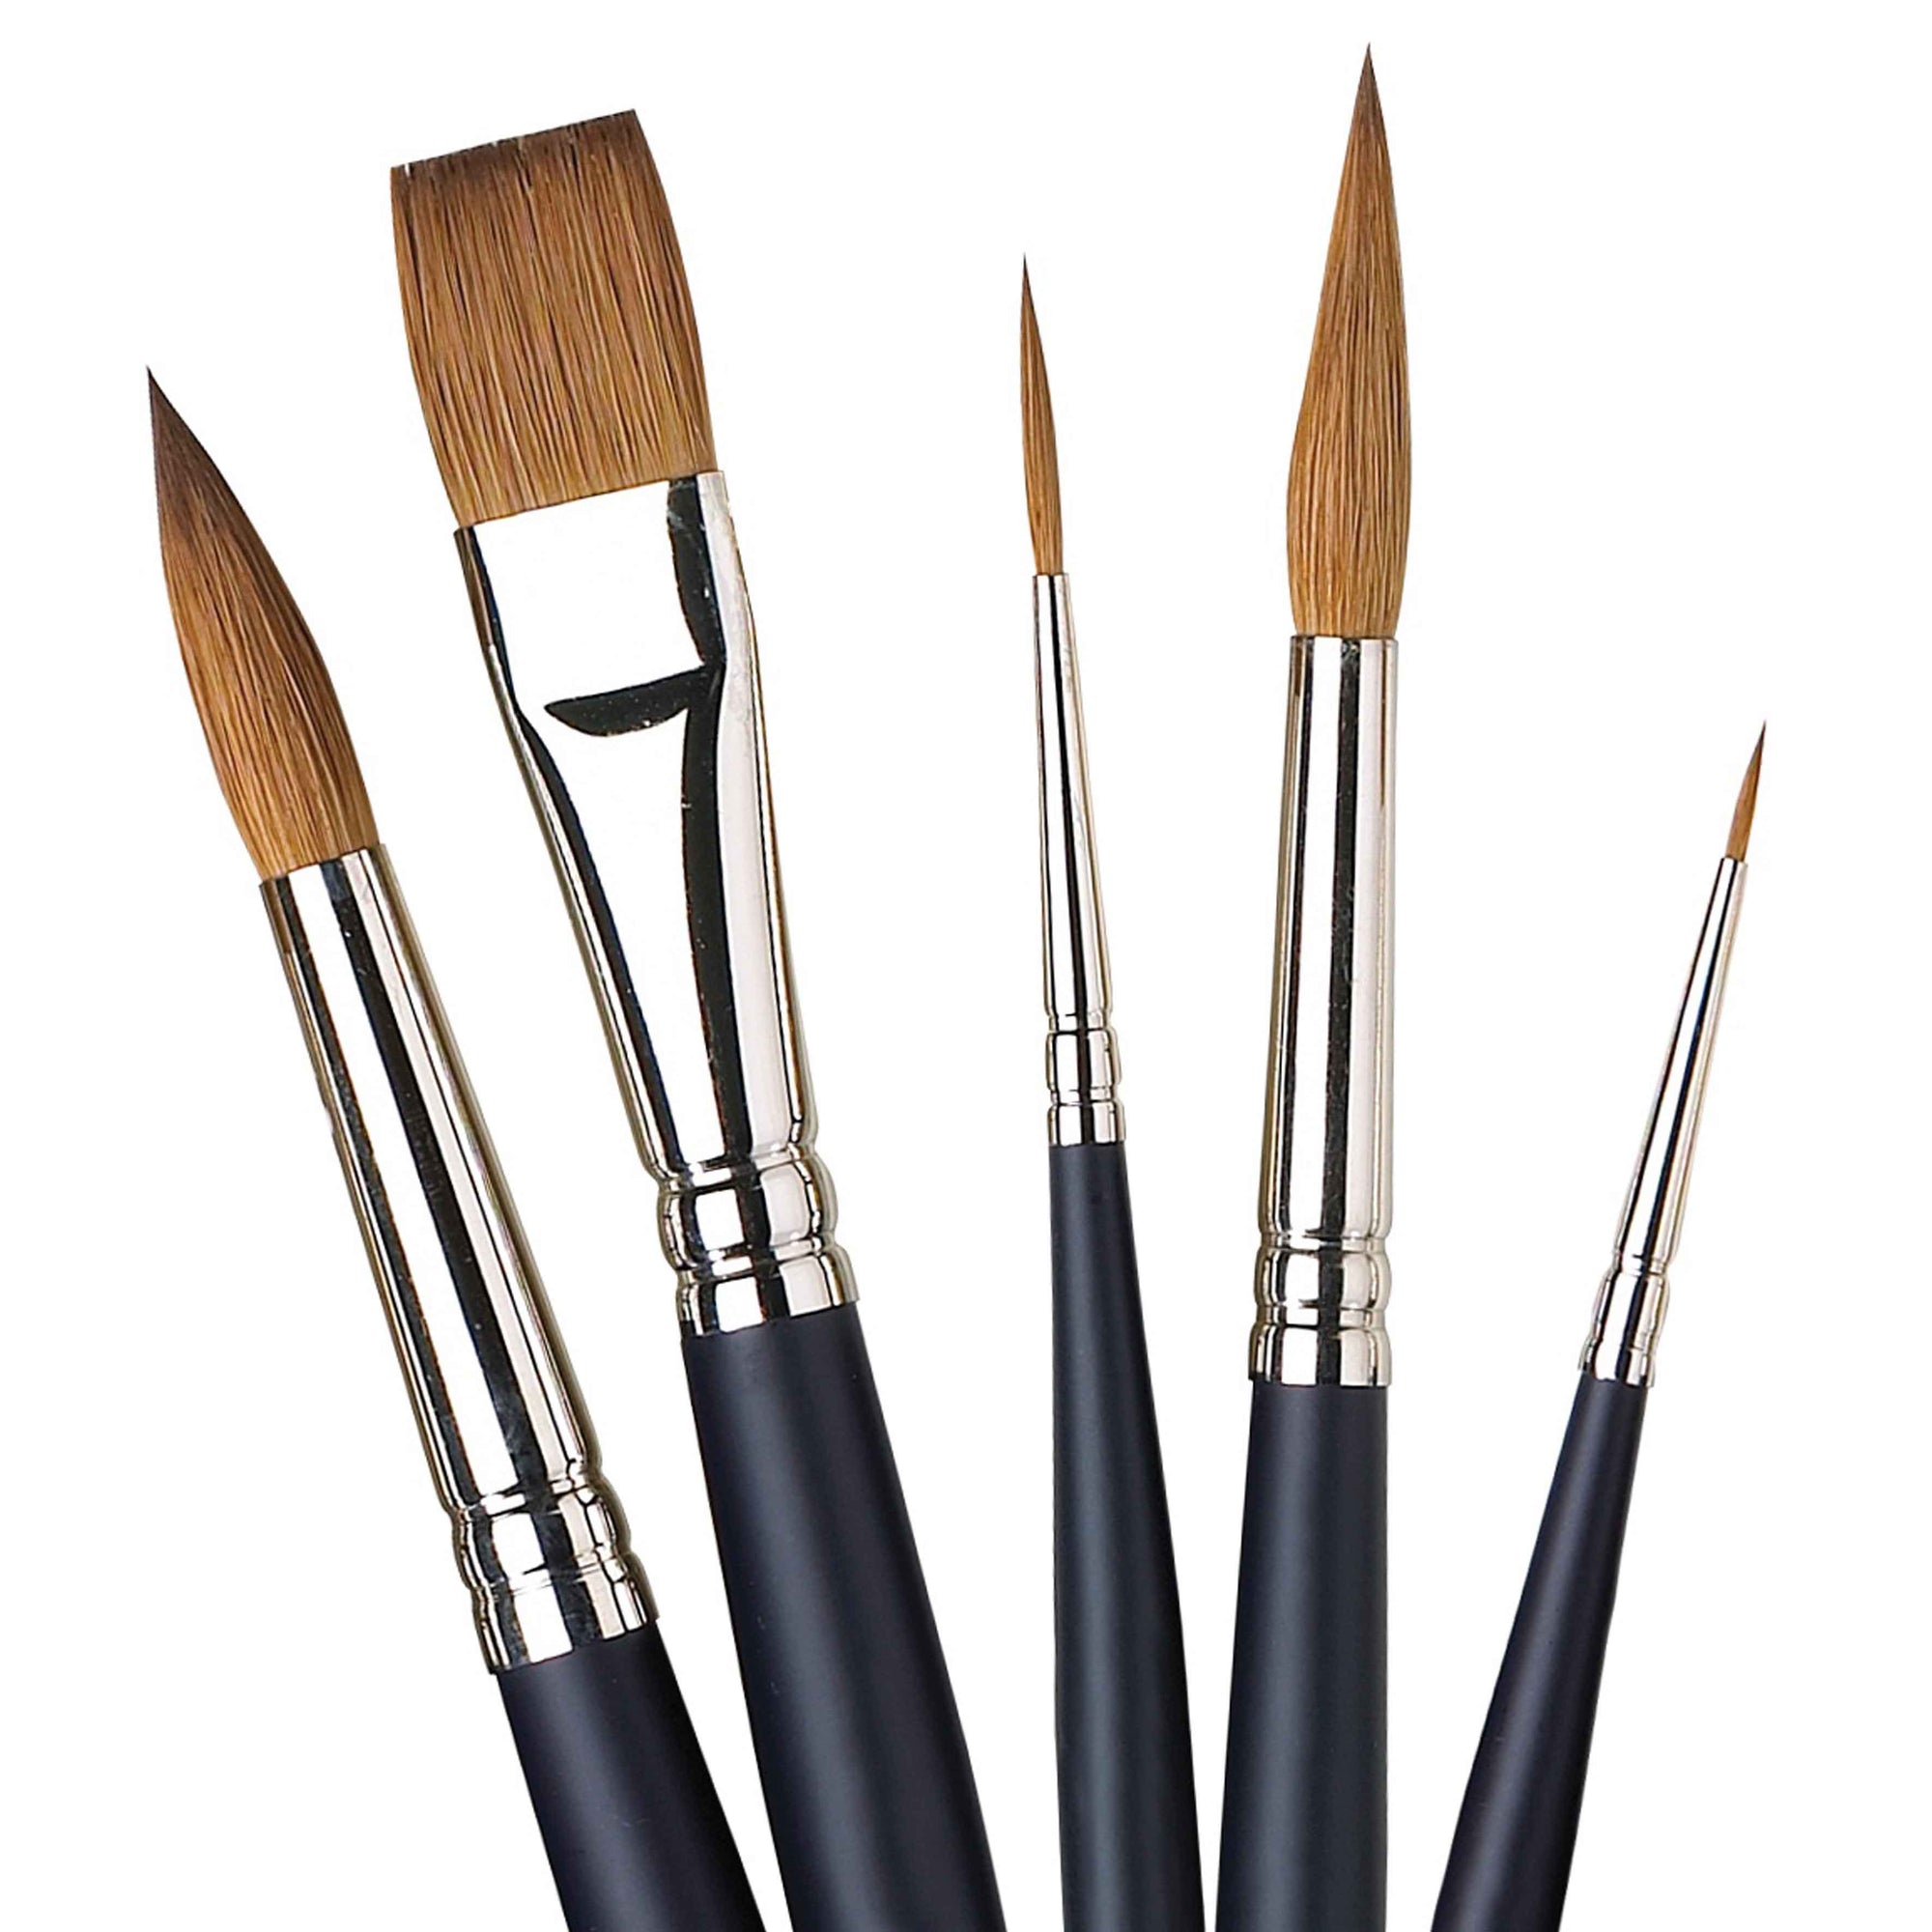 Winsor & Newtons Artists' Professional Watercolour Sable brush range is hand-made with high-quality Kolinsky sable hair. These round sable brushes also have an extra-fine tapered point which aids accuracy and fine detail work.